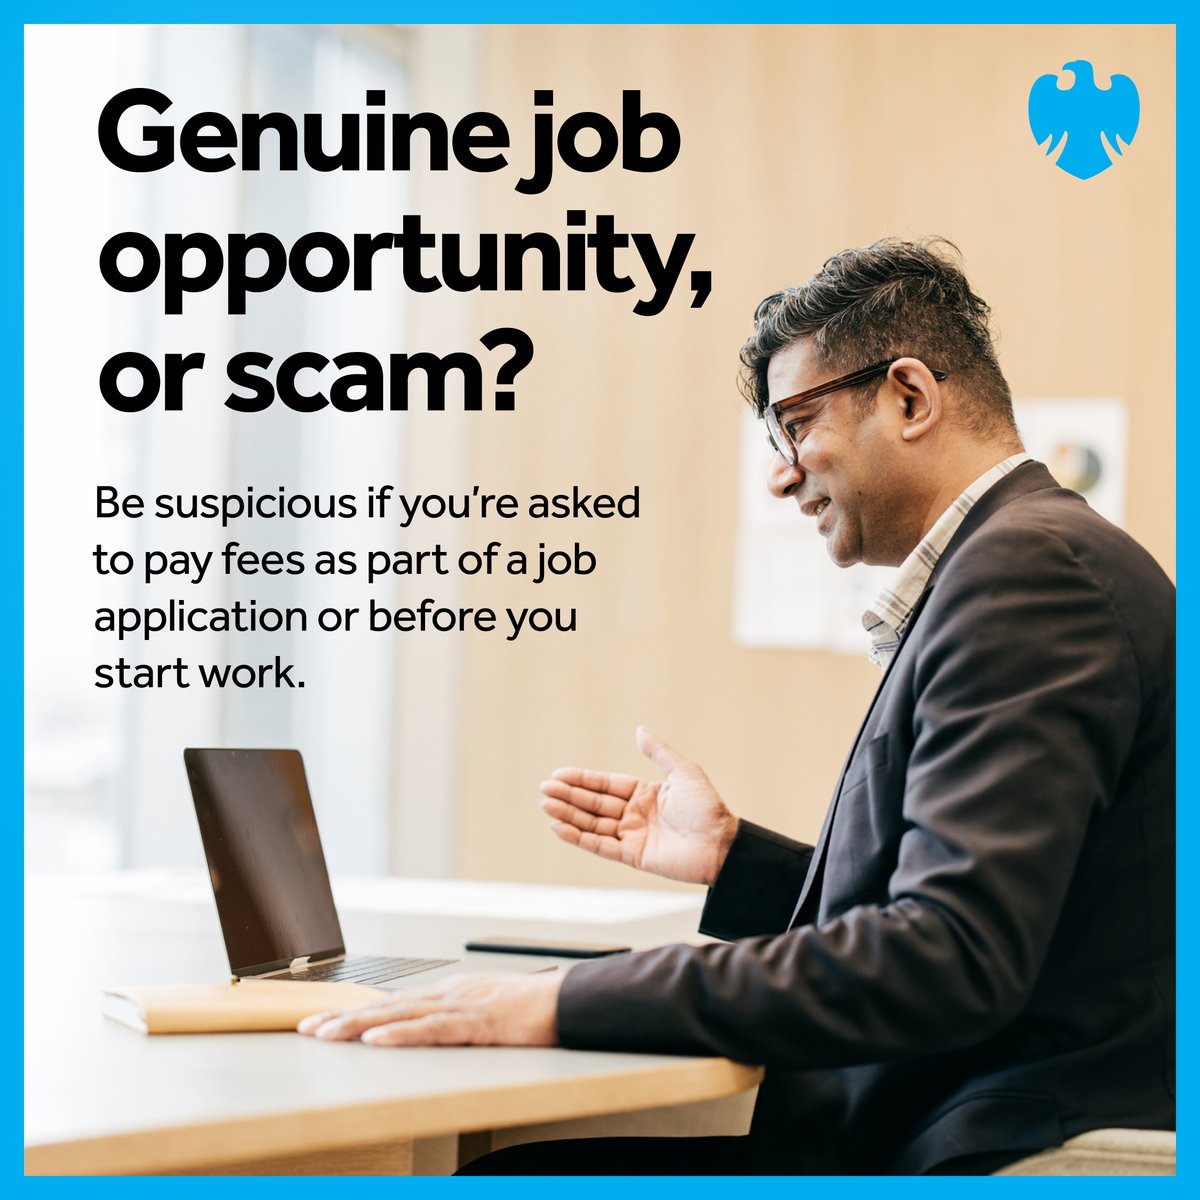 ⚠️ Scammers use fake ads to trick you into applying for a job that doesn’t exist, then say you need to pay for background checks or other costs. Once you’ve paid, they disappear. Find out more about fake job scams: barc.ly/3vynMMe #takefive